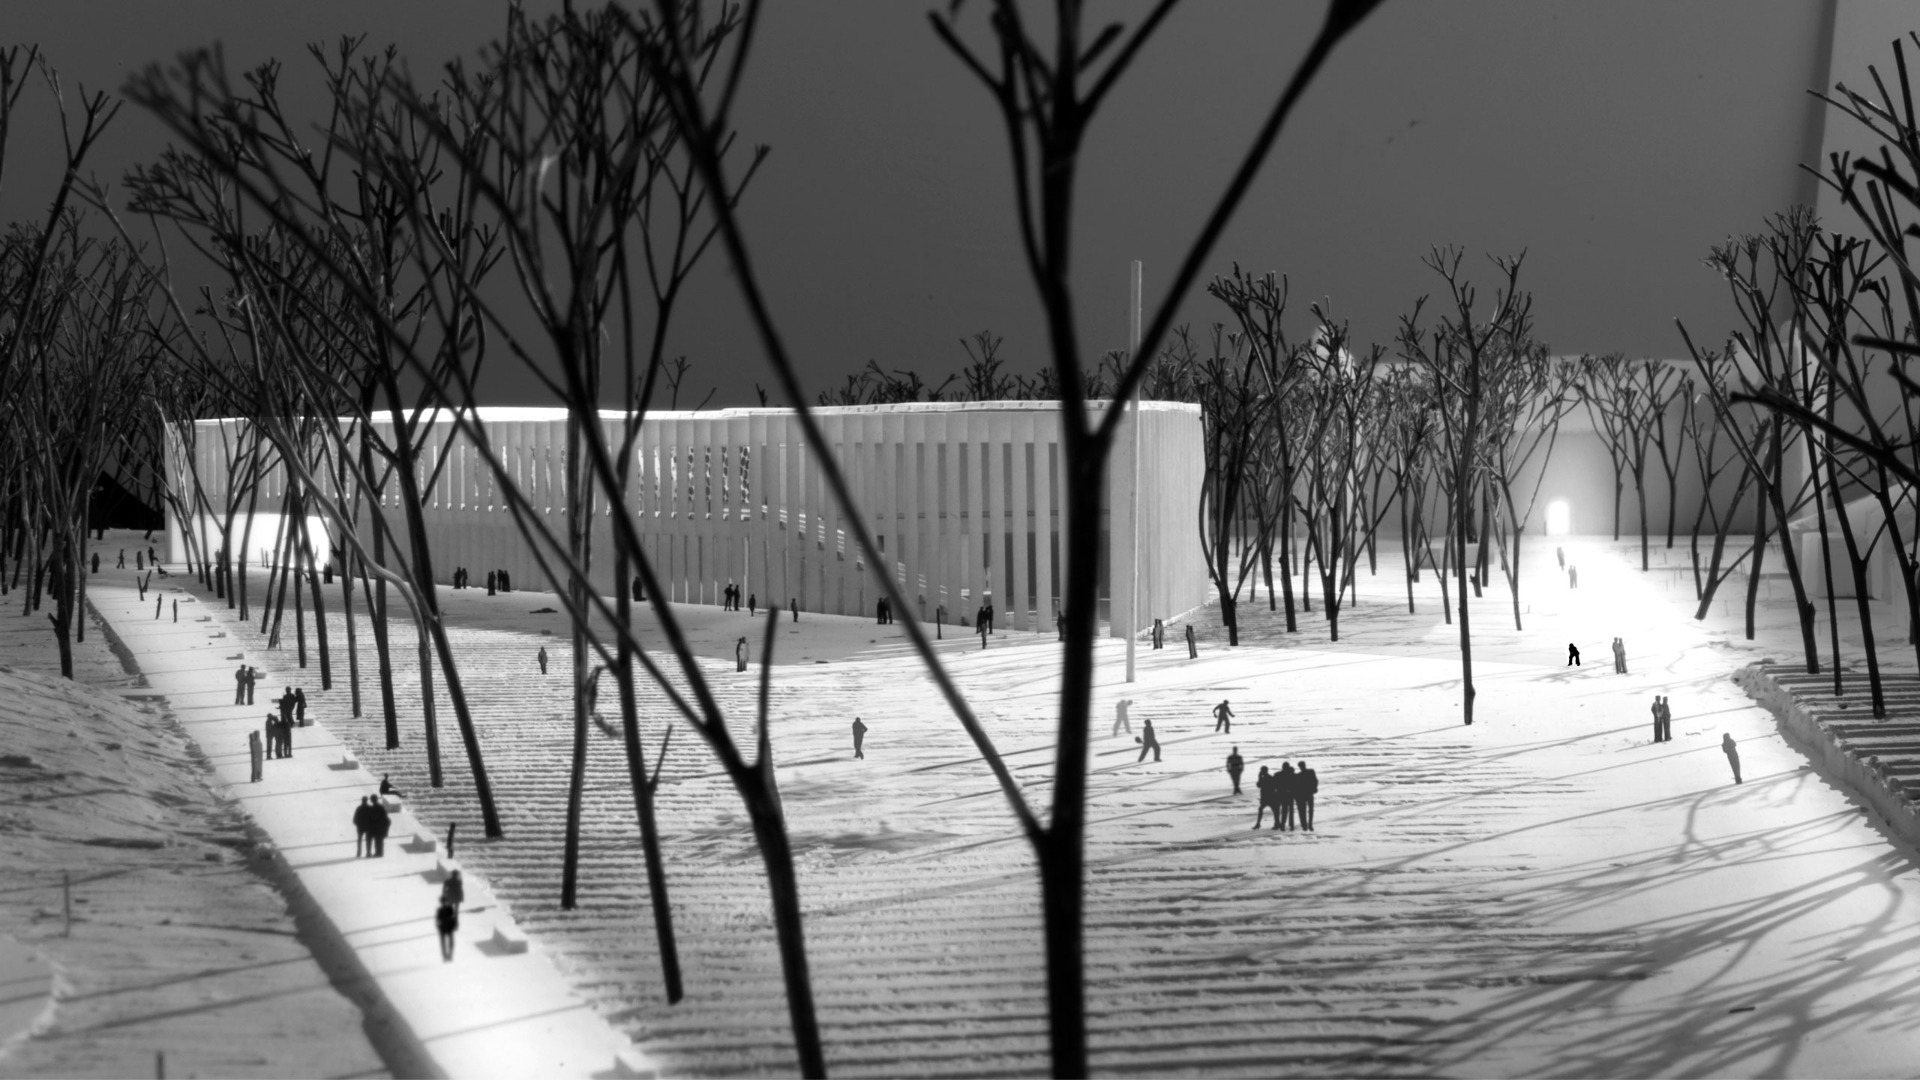 Competition for the Museum of Polish History